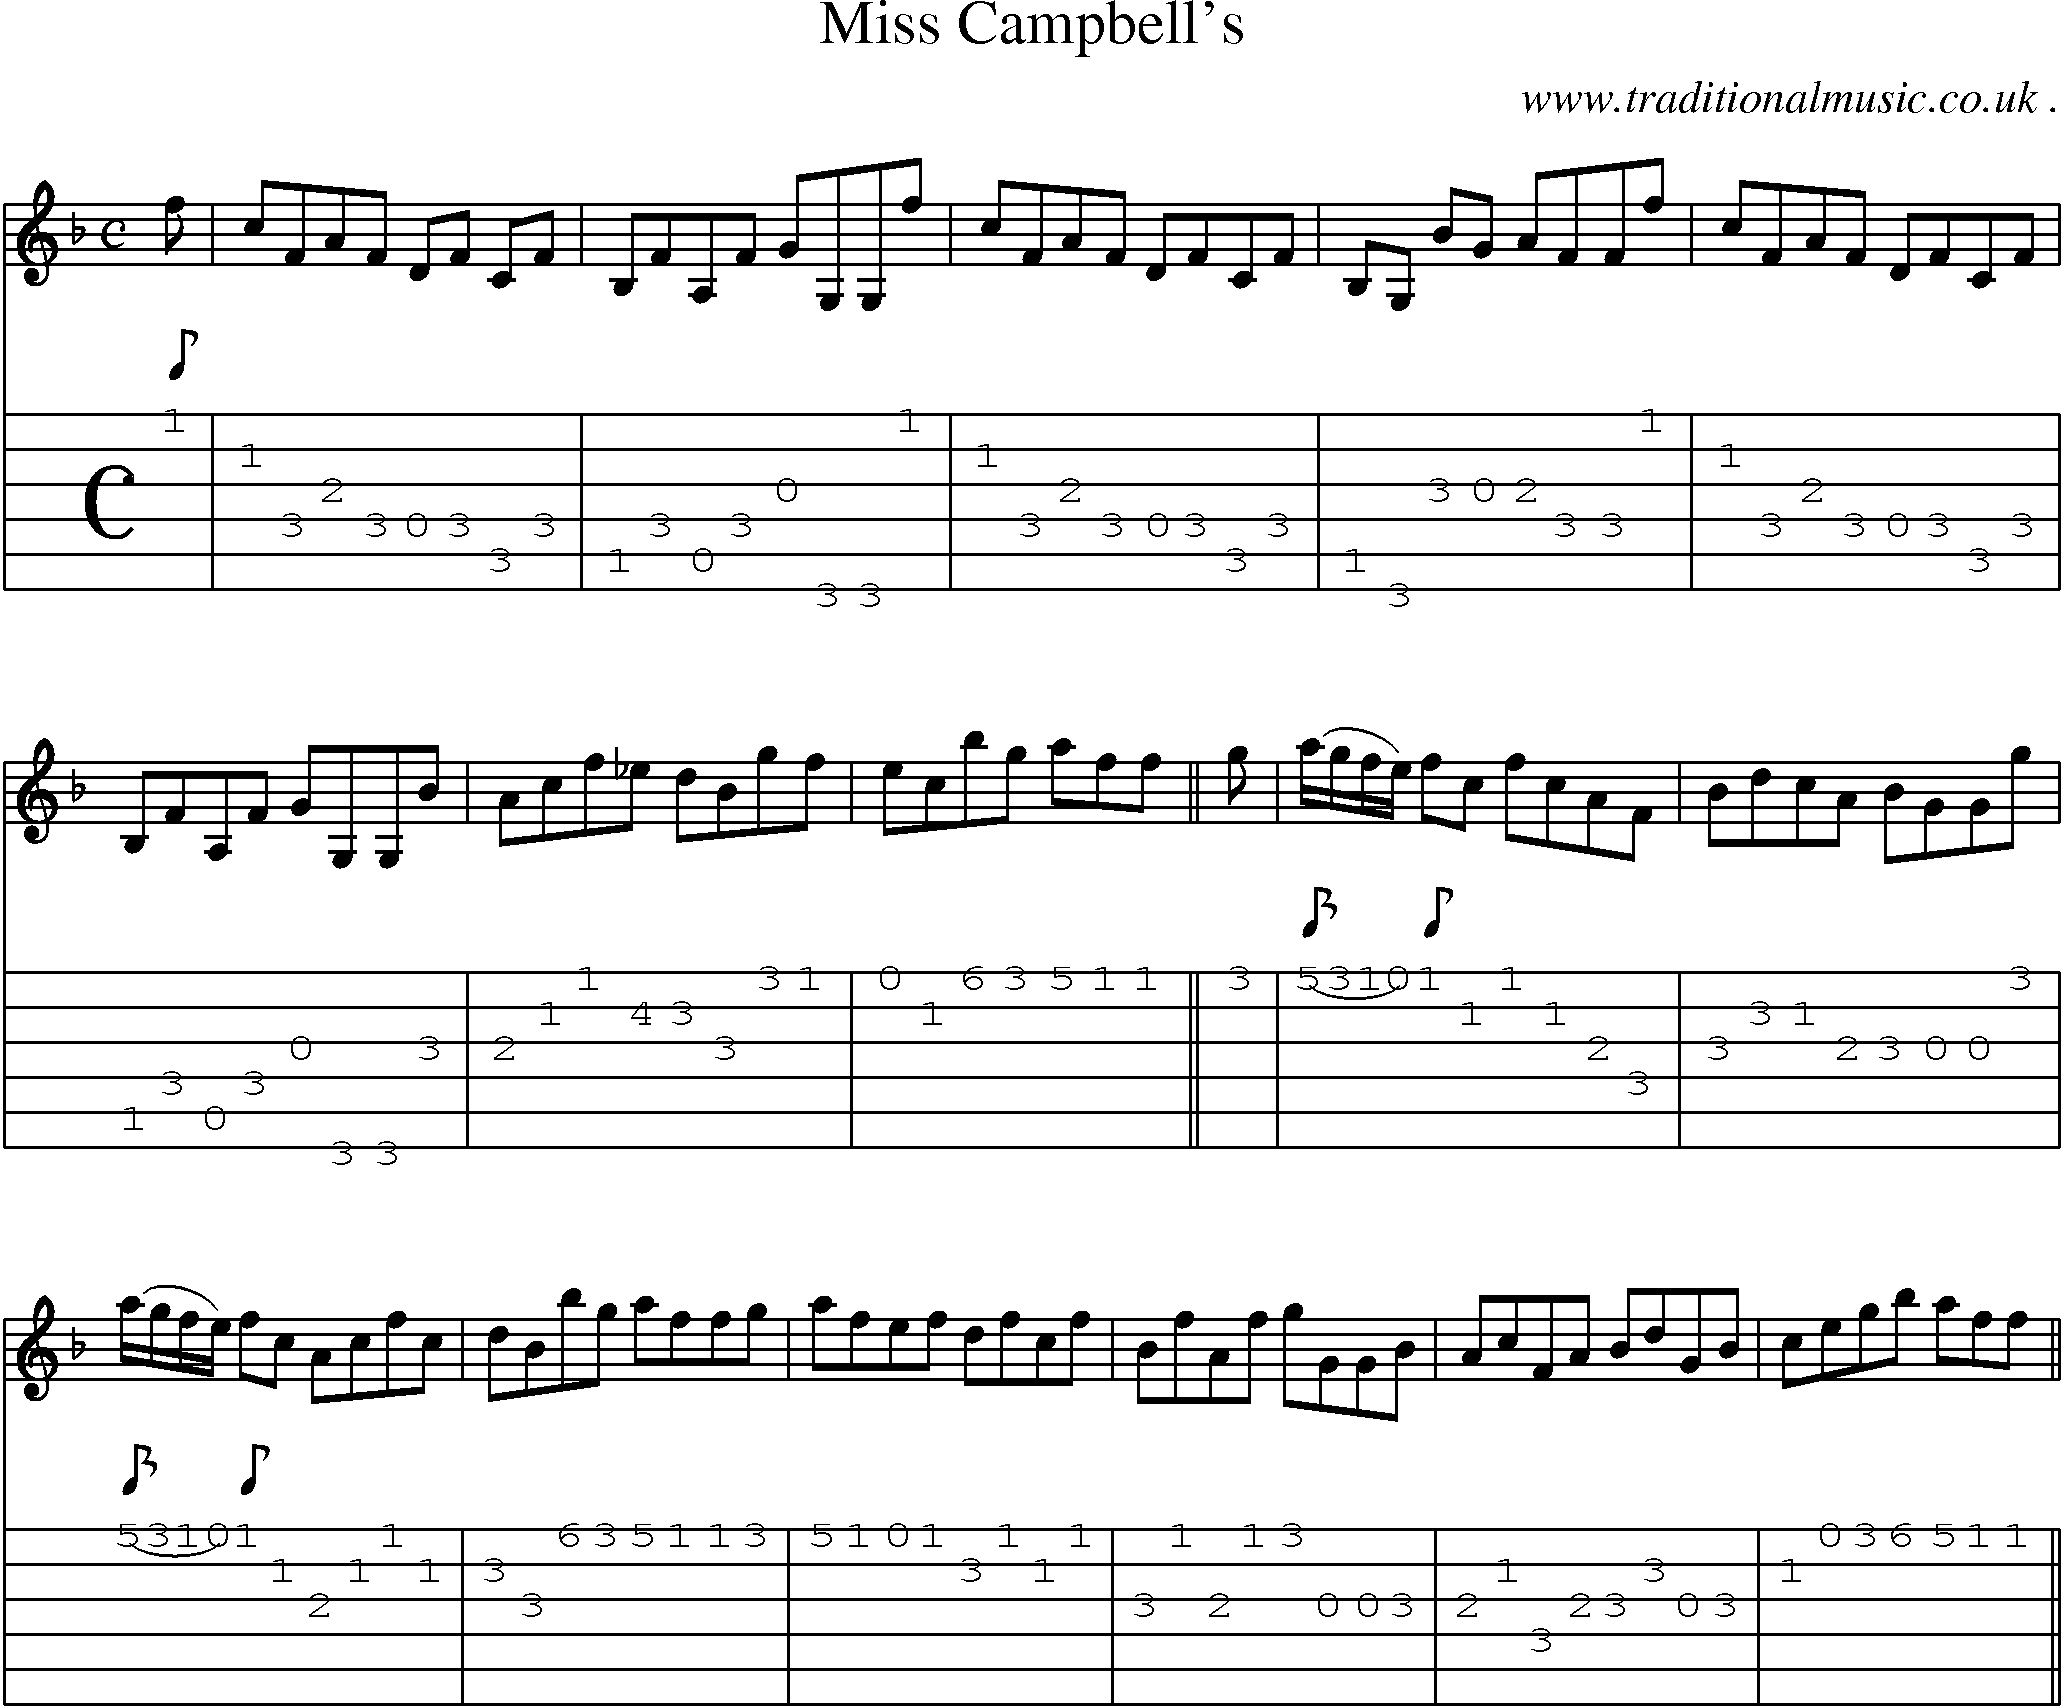 Sheet-music  score, Chords and Guitar Tabs for Miss Campbells